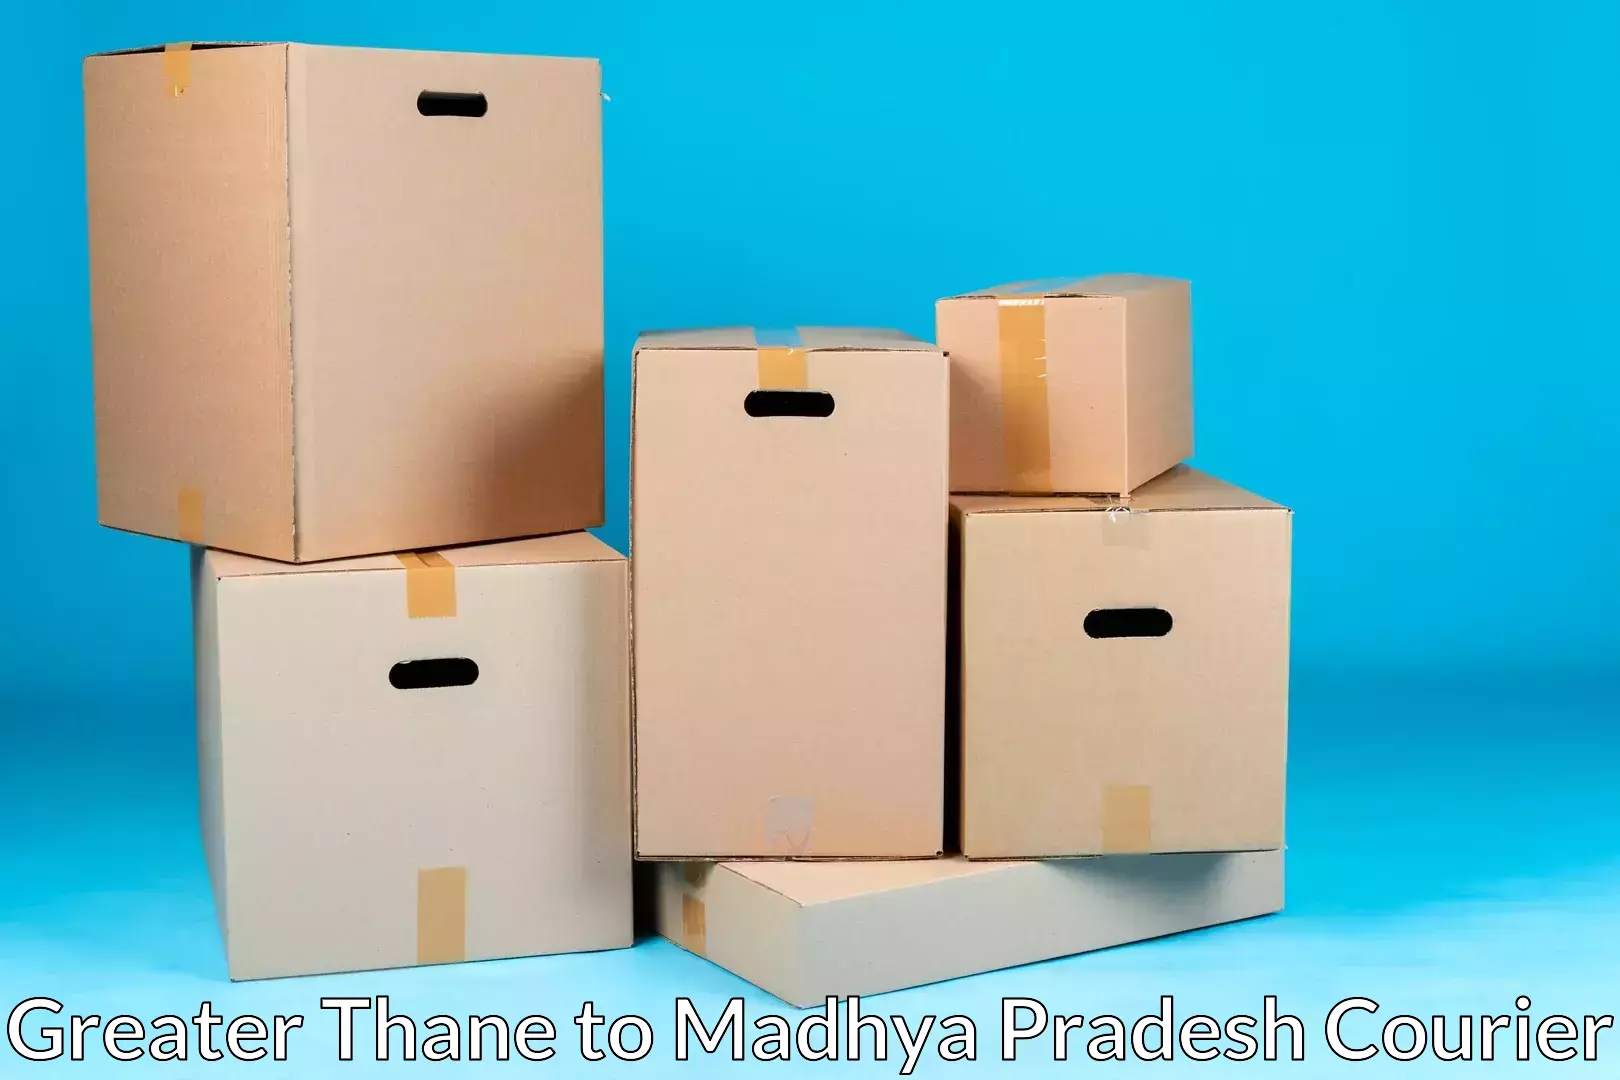 Home moving experts Greater Thane to Amla